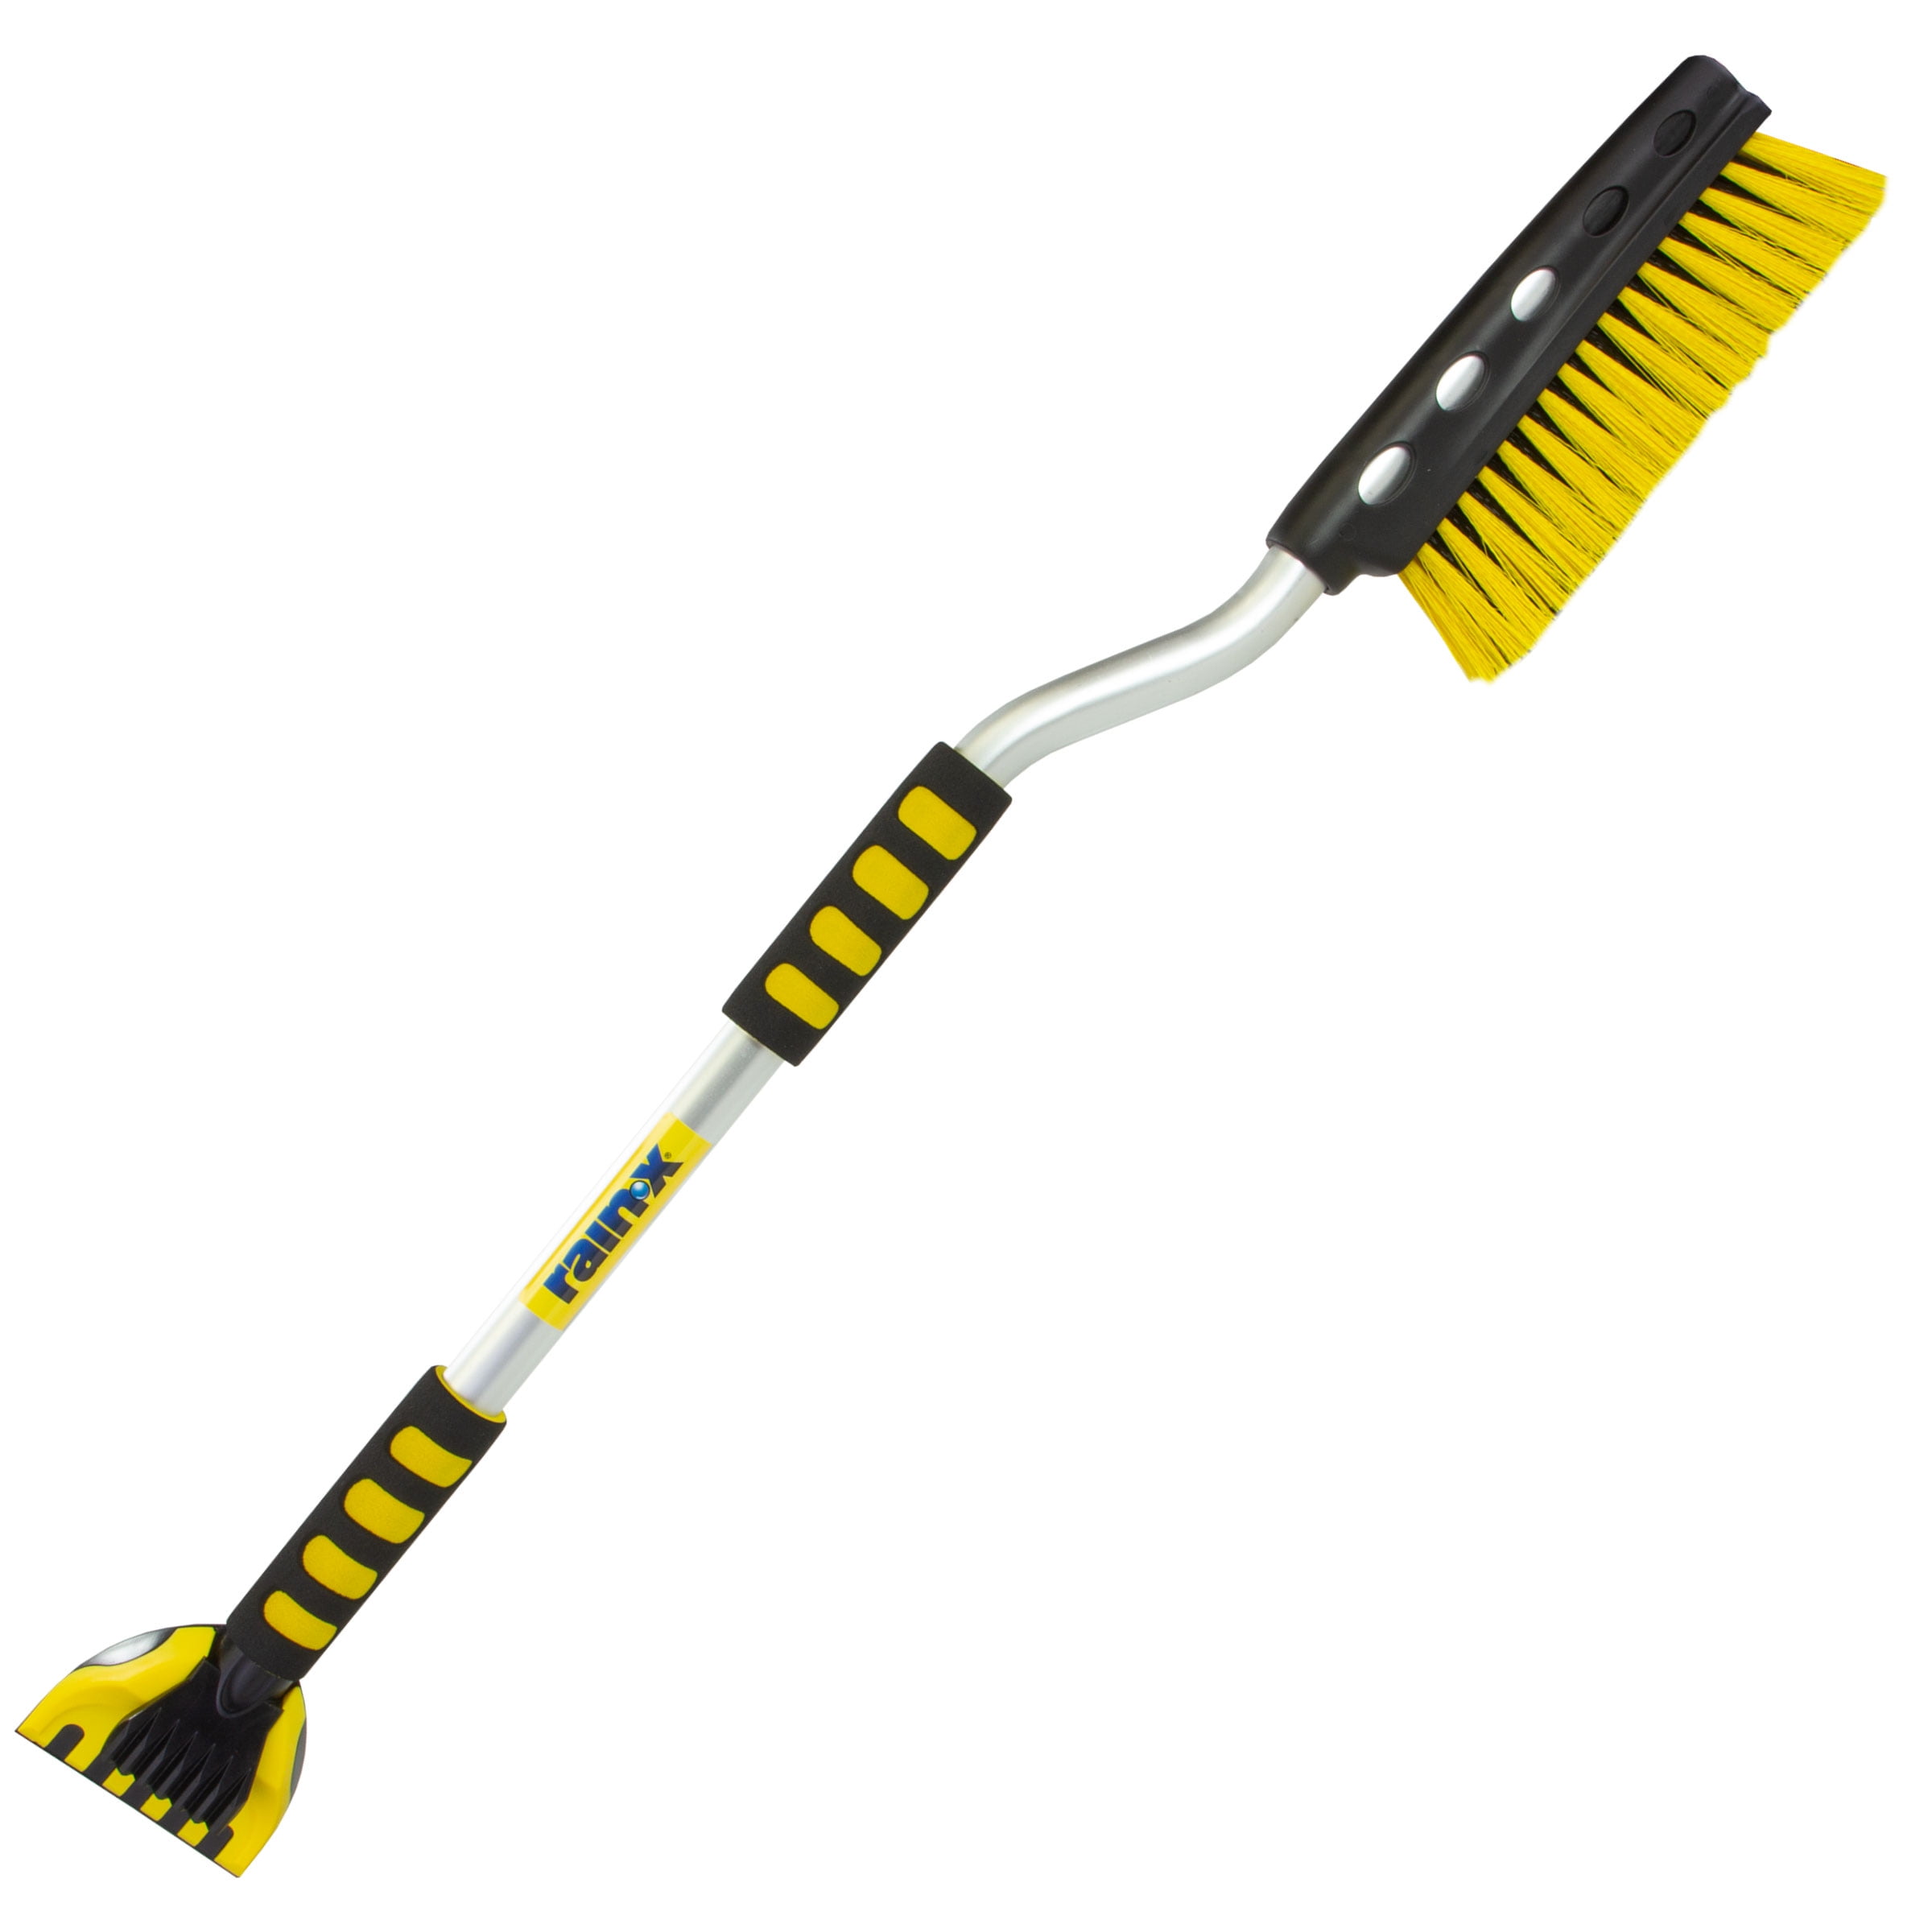 Rain-X 35 Snow Brush Ice Scraper with Curved Handle, Black, Yellow and  Silver, 1 Pack, S8-999PVX 